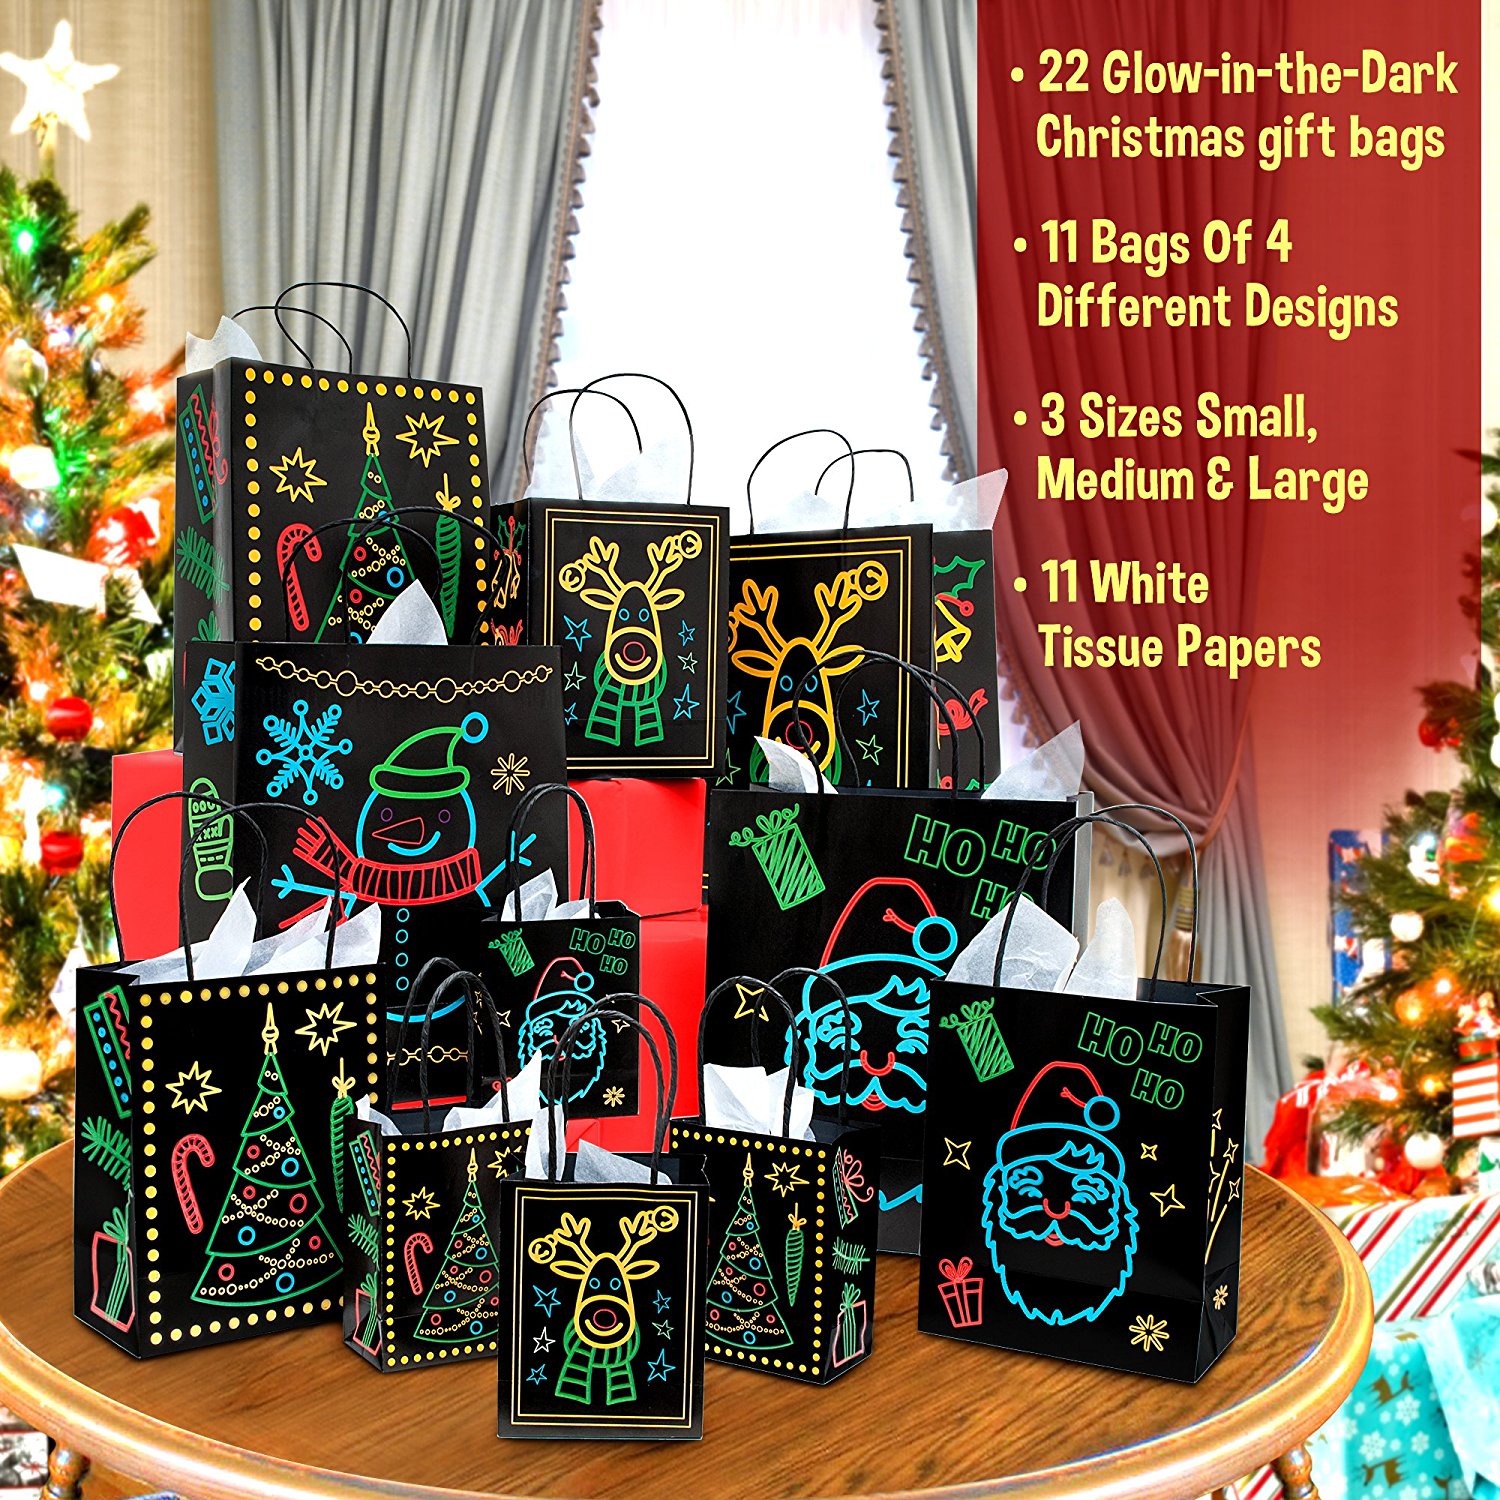 Amazon.com: Christmas Holiday Glow-In-The-Dark Gift Bag | 22 Piece ...